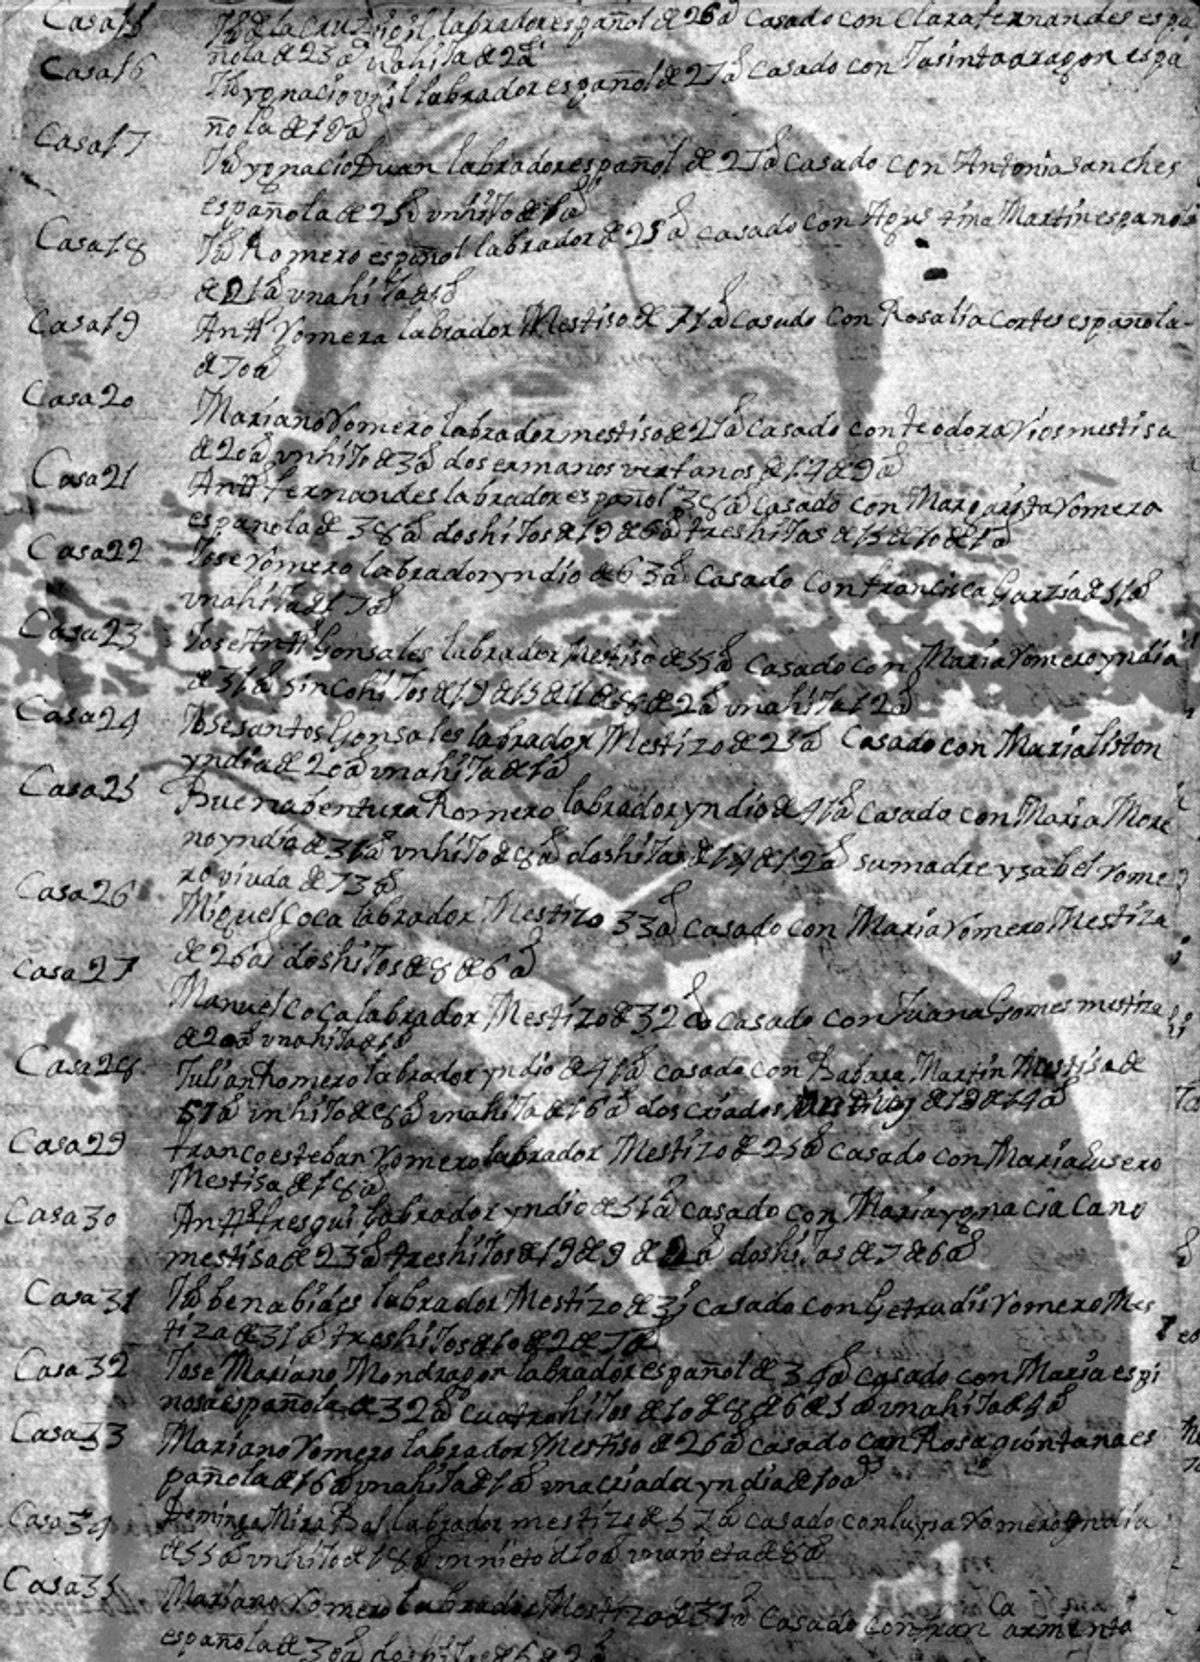 Image of Albino Silva, who served as an Indian servant in Del Norte, Colorado, to Maria del Refugio Alarid. He was born circa 1859 in New Mexico and is believed to be a Jicarilla Apache. He lived much of his life in Del Norte. The image is transposed with a 1790 census of Taos designed by Juan R. Rios. Courtesy of the New Mexico State Archives and the Rio Grande County Museum